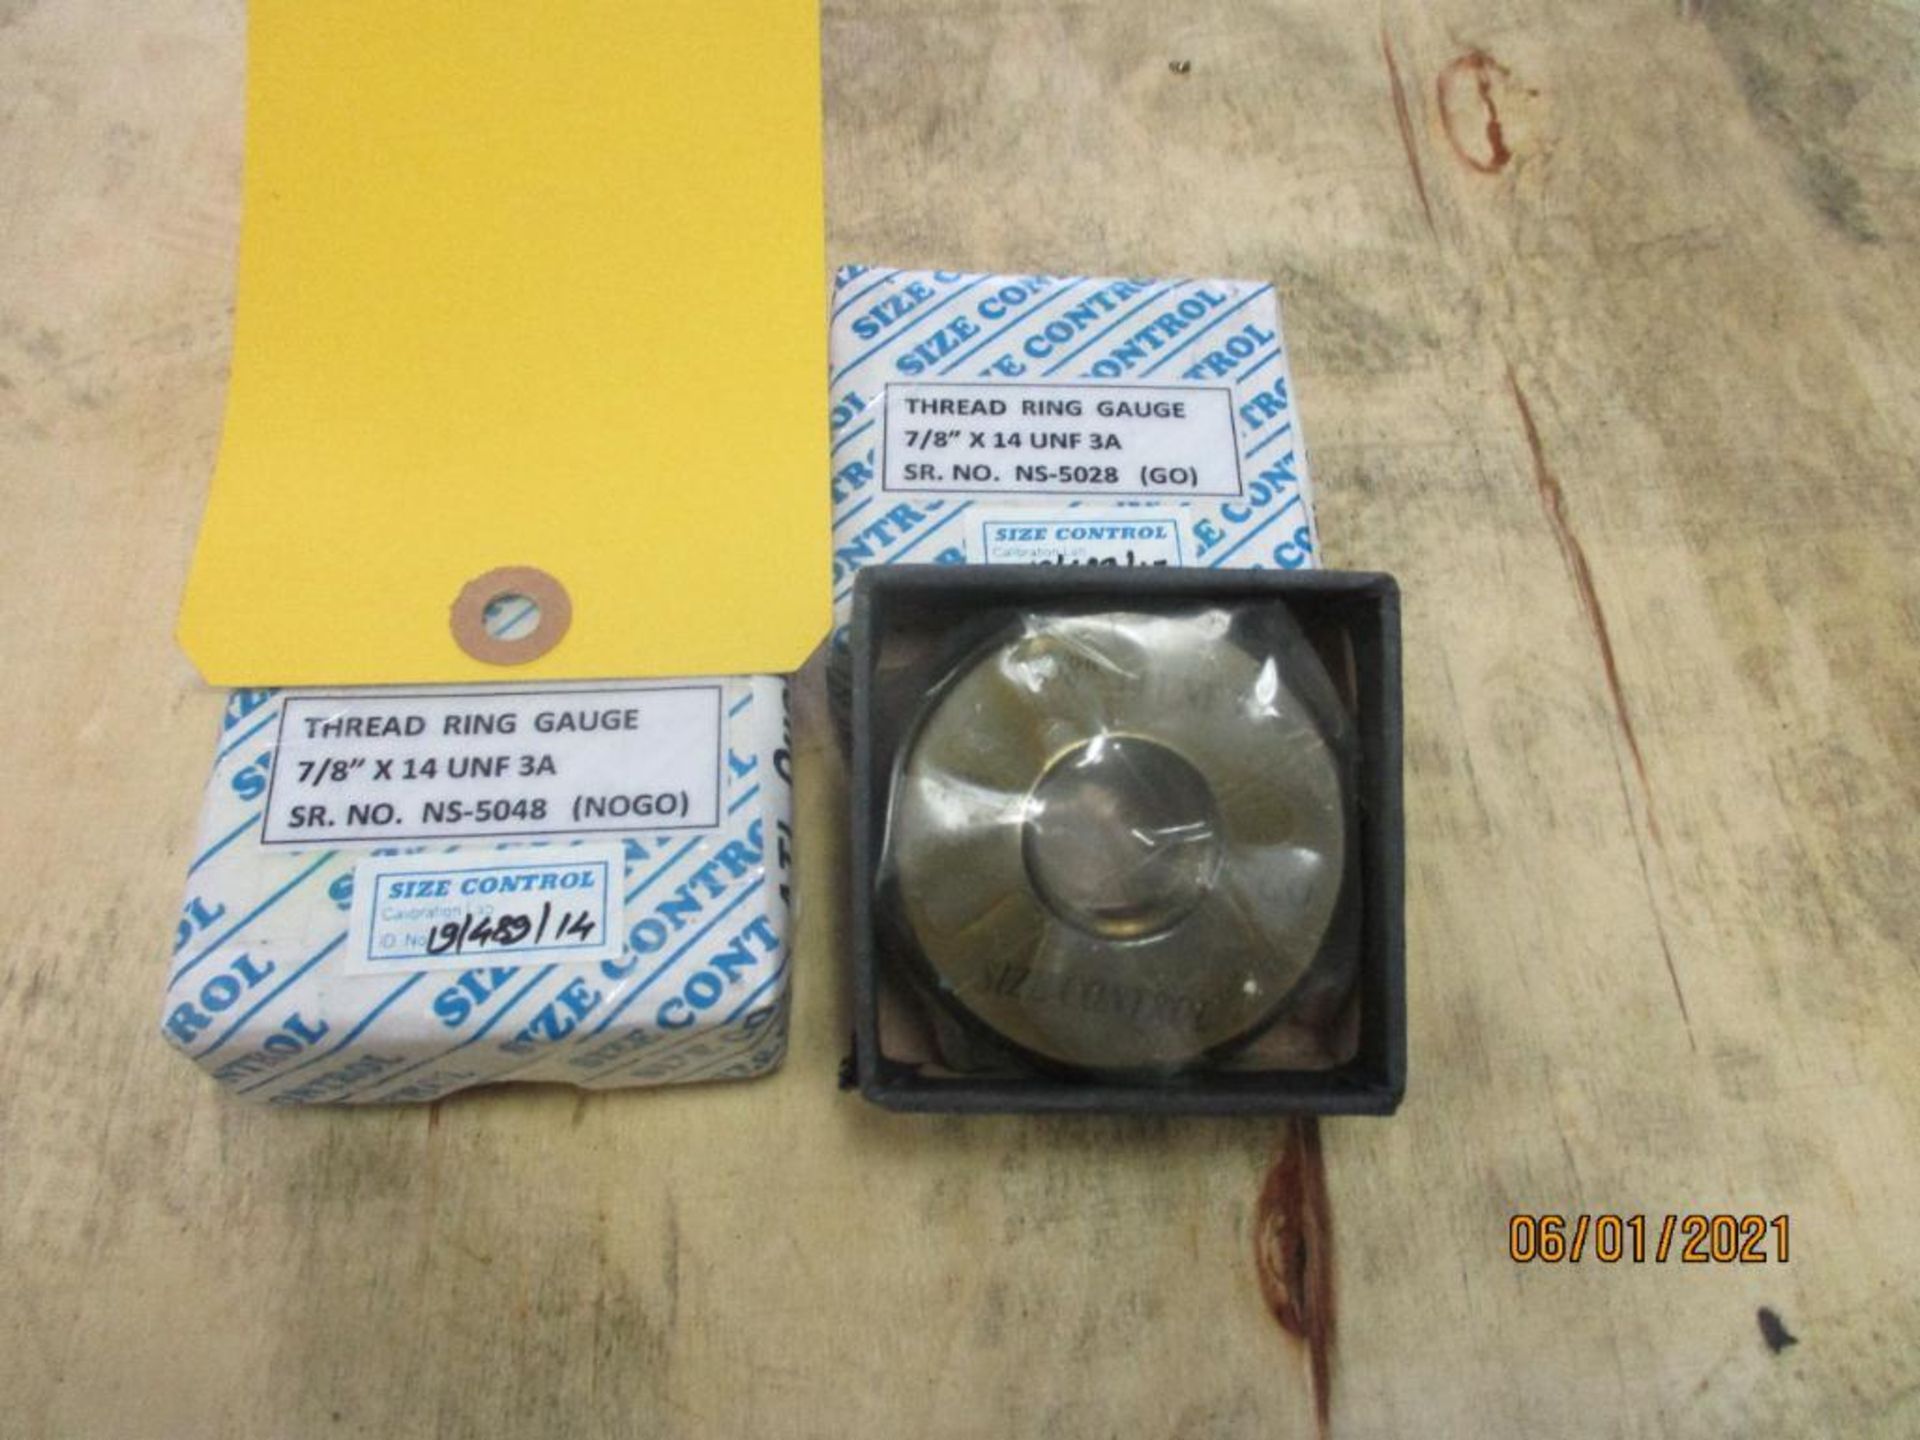 Set of GO/NOGO Thread Ring Gages, 7/8 in. -14 UNF-3A (All inspection eq. is like New and Mostly